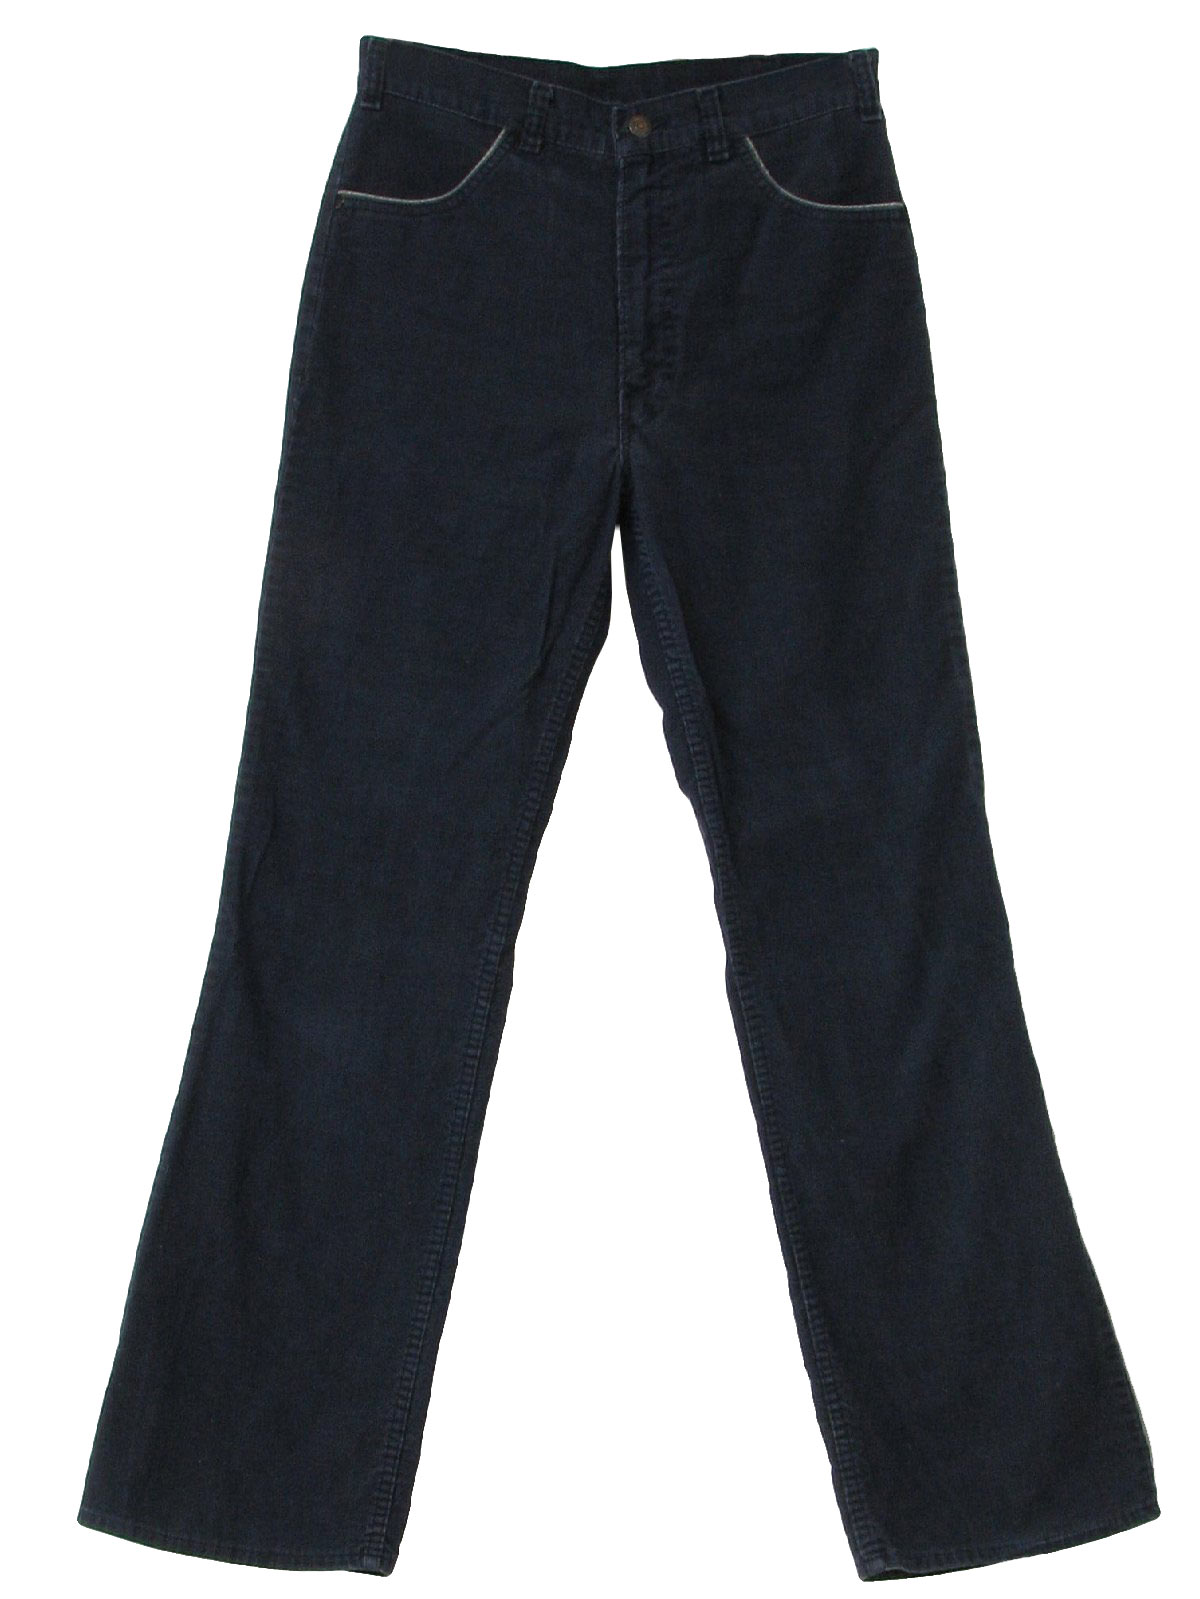 Vintage 1980's Pants: Early 80s -Levis- Womens navy blue cotton ...